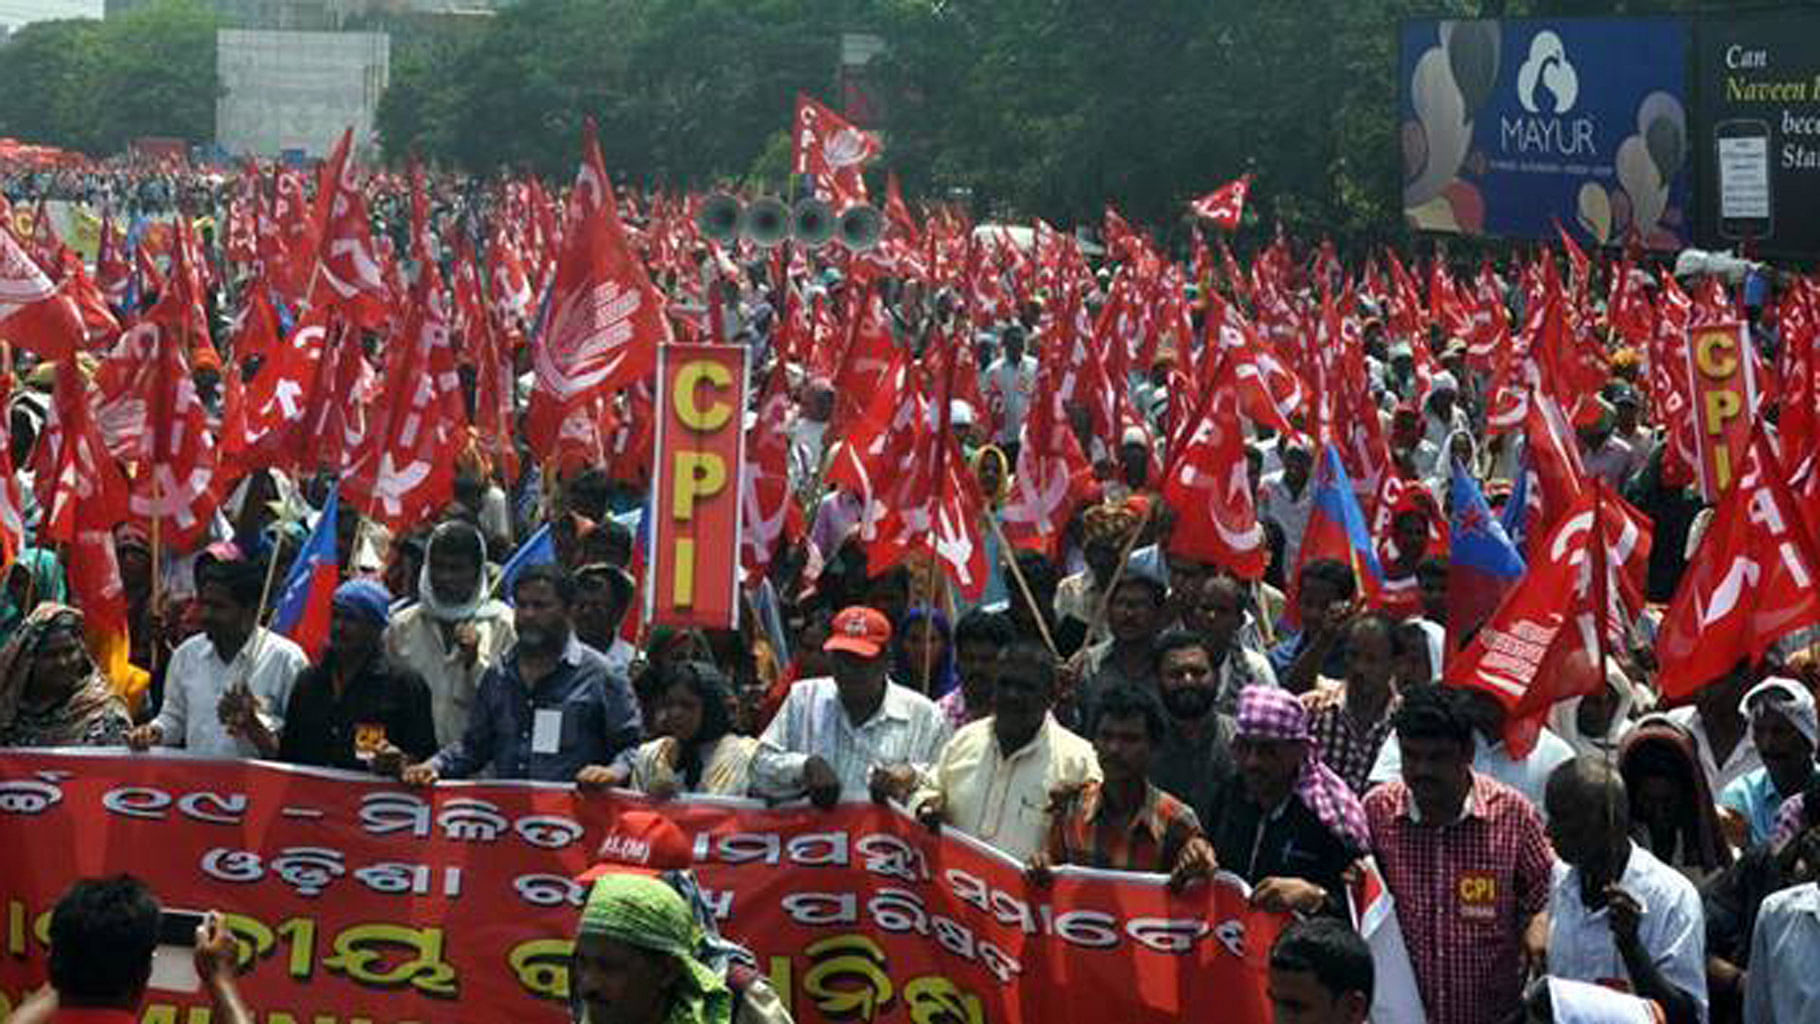 A CPI rally. (Photo Courtesy: Communist Party of India/<a href="https://www.facebook.com/cpofindia">Facebook</a>)